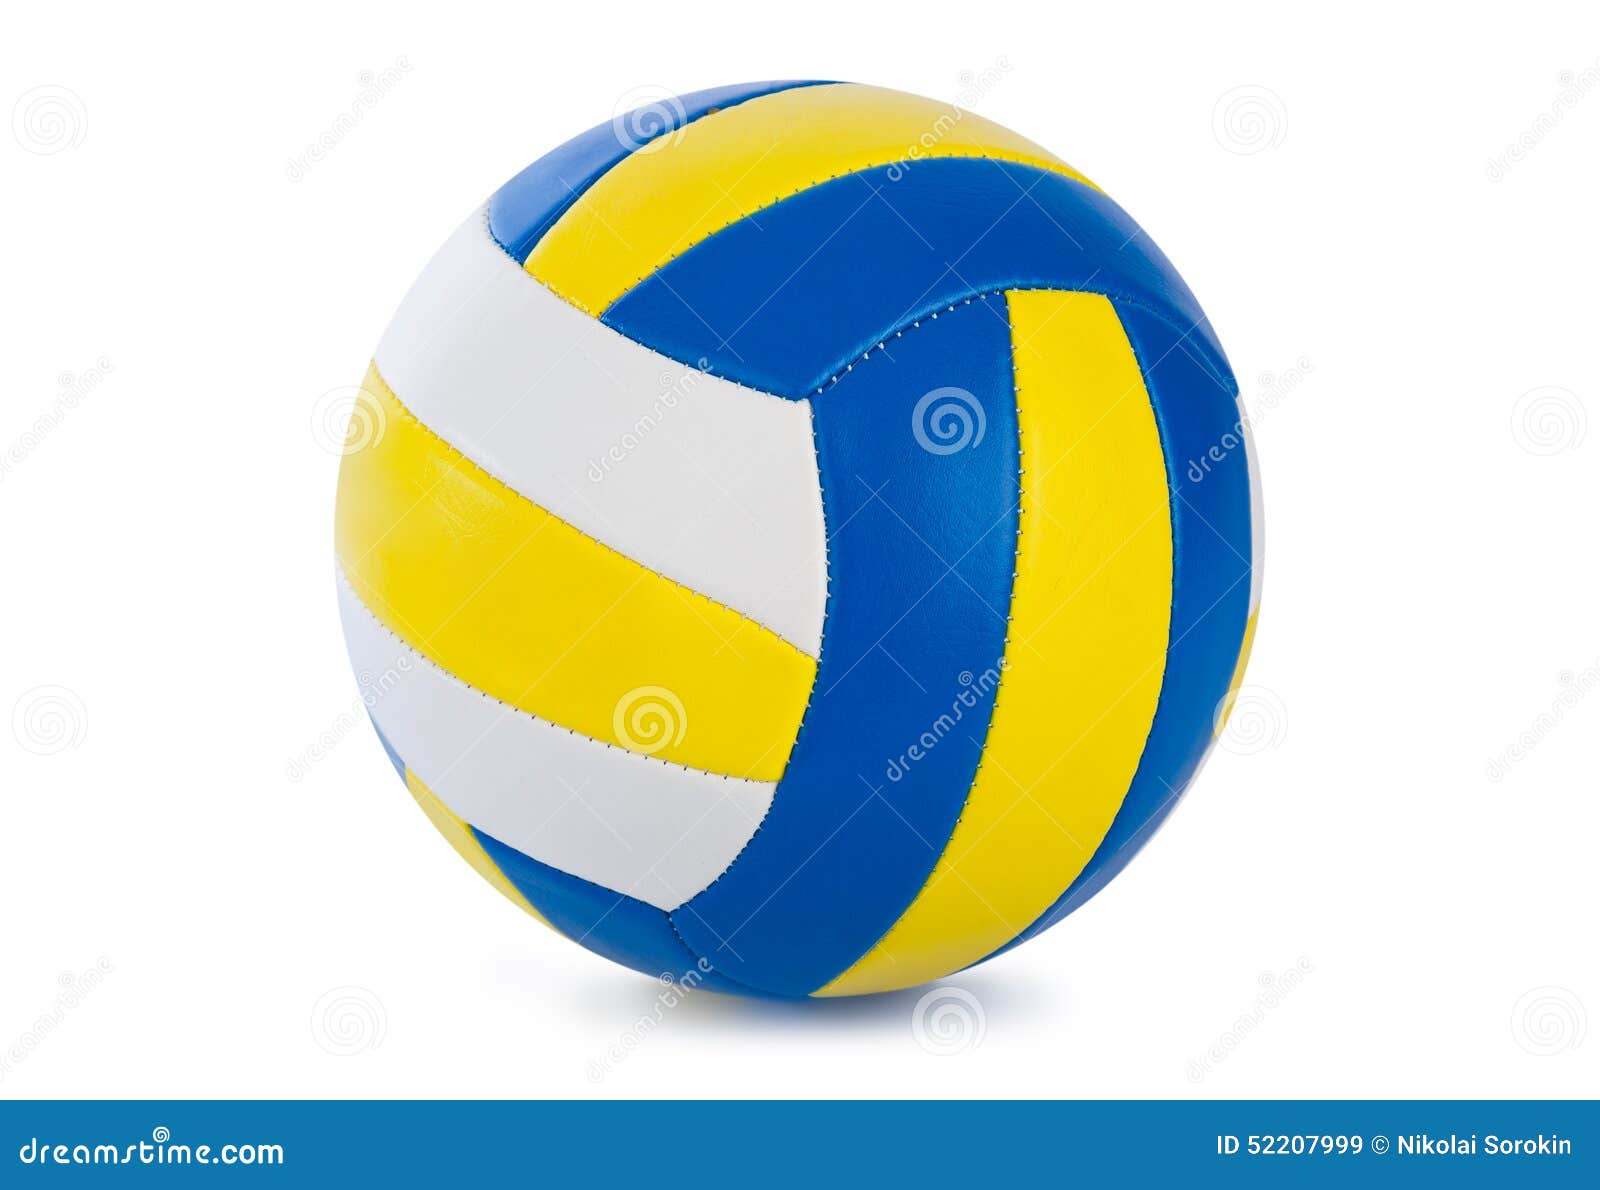 volleyball clipart no background - photo #49